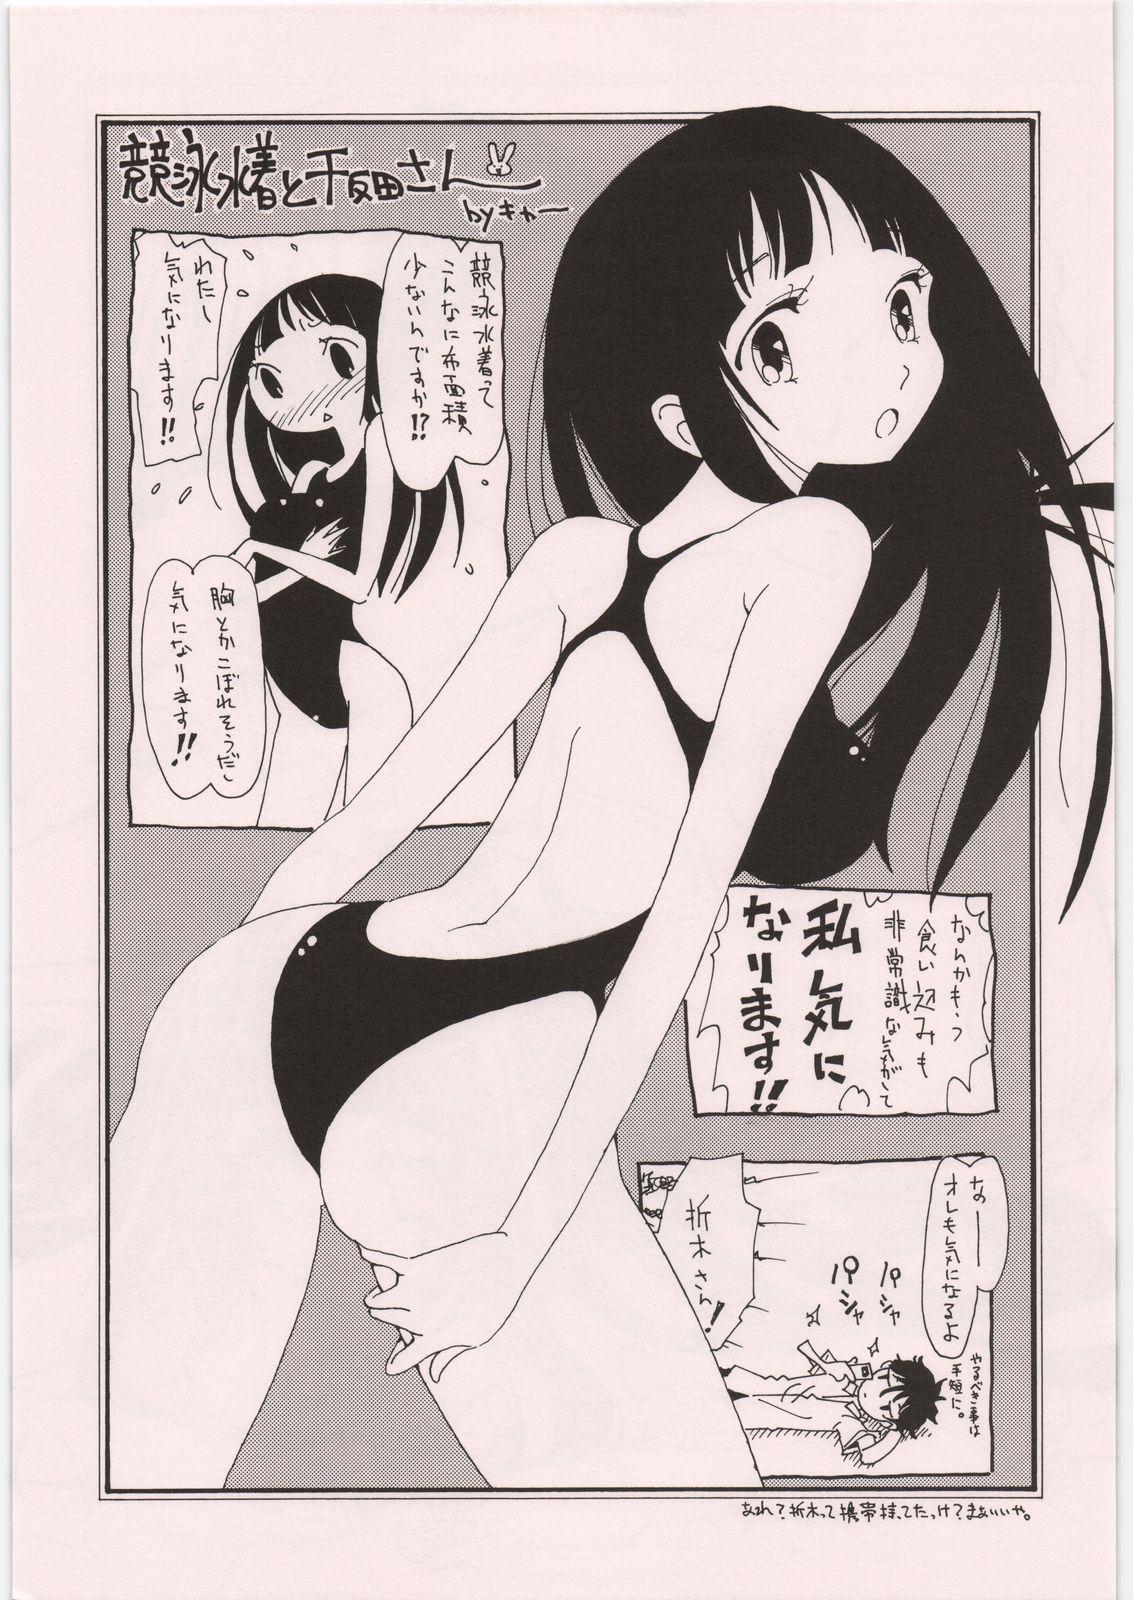 First Time Super Chitanda Time!! - Hyouka Plumper - Page 5